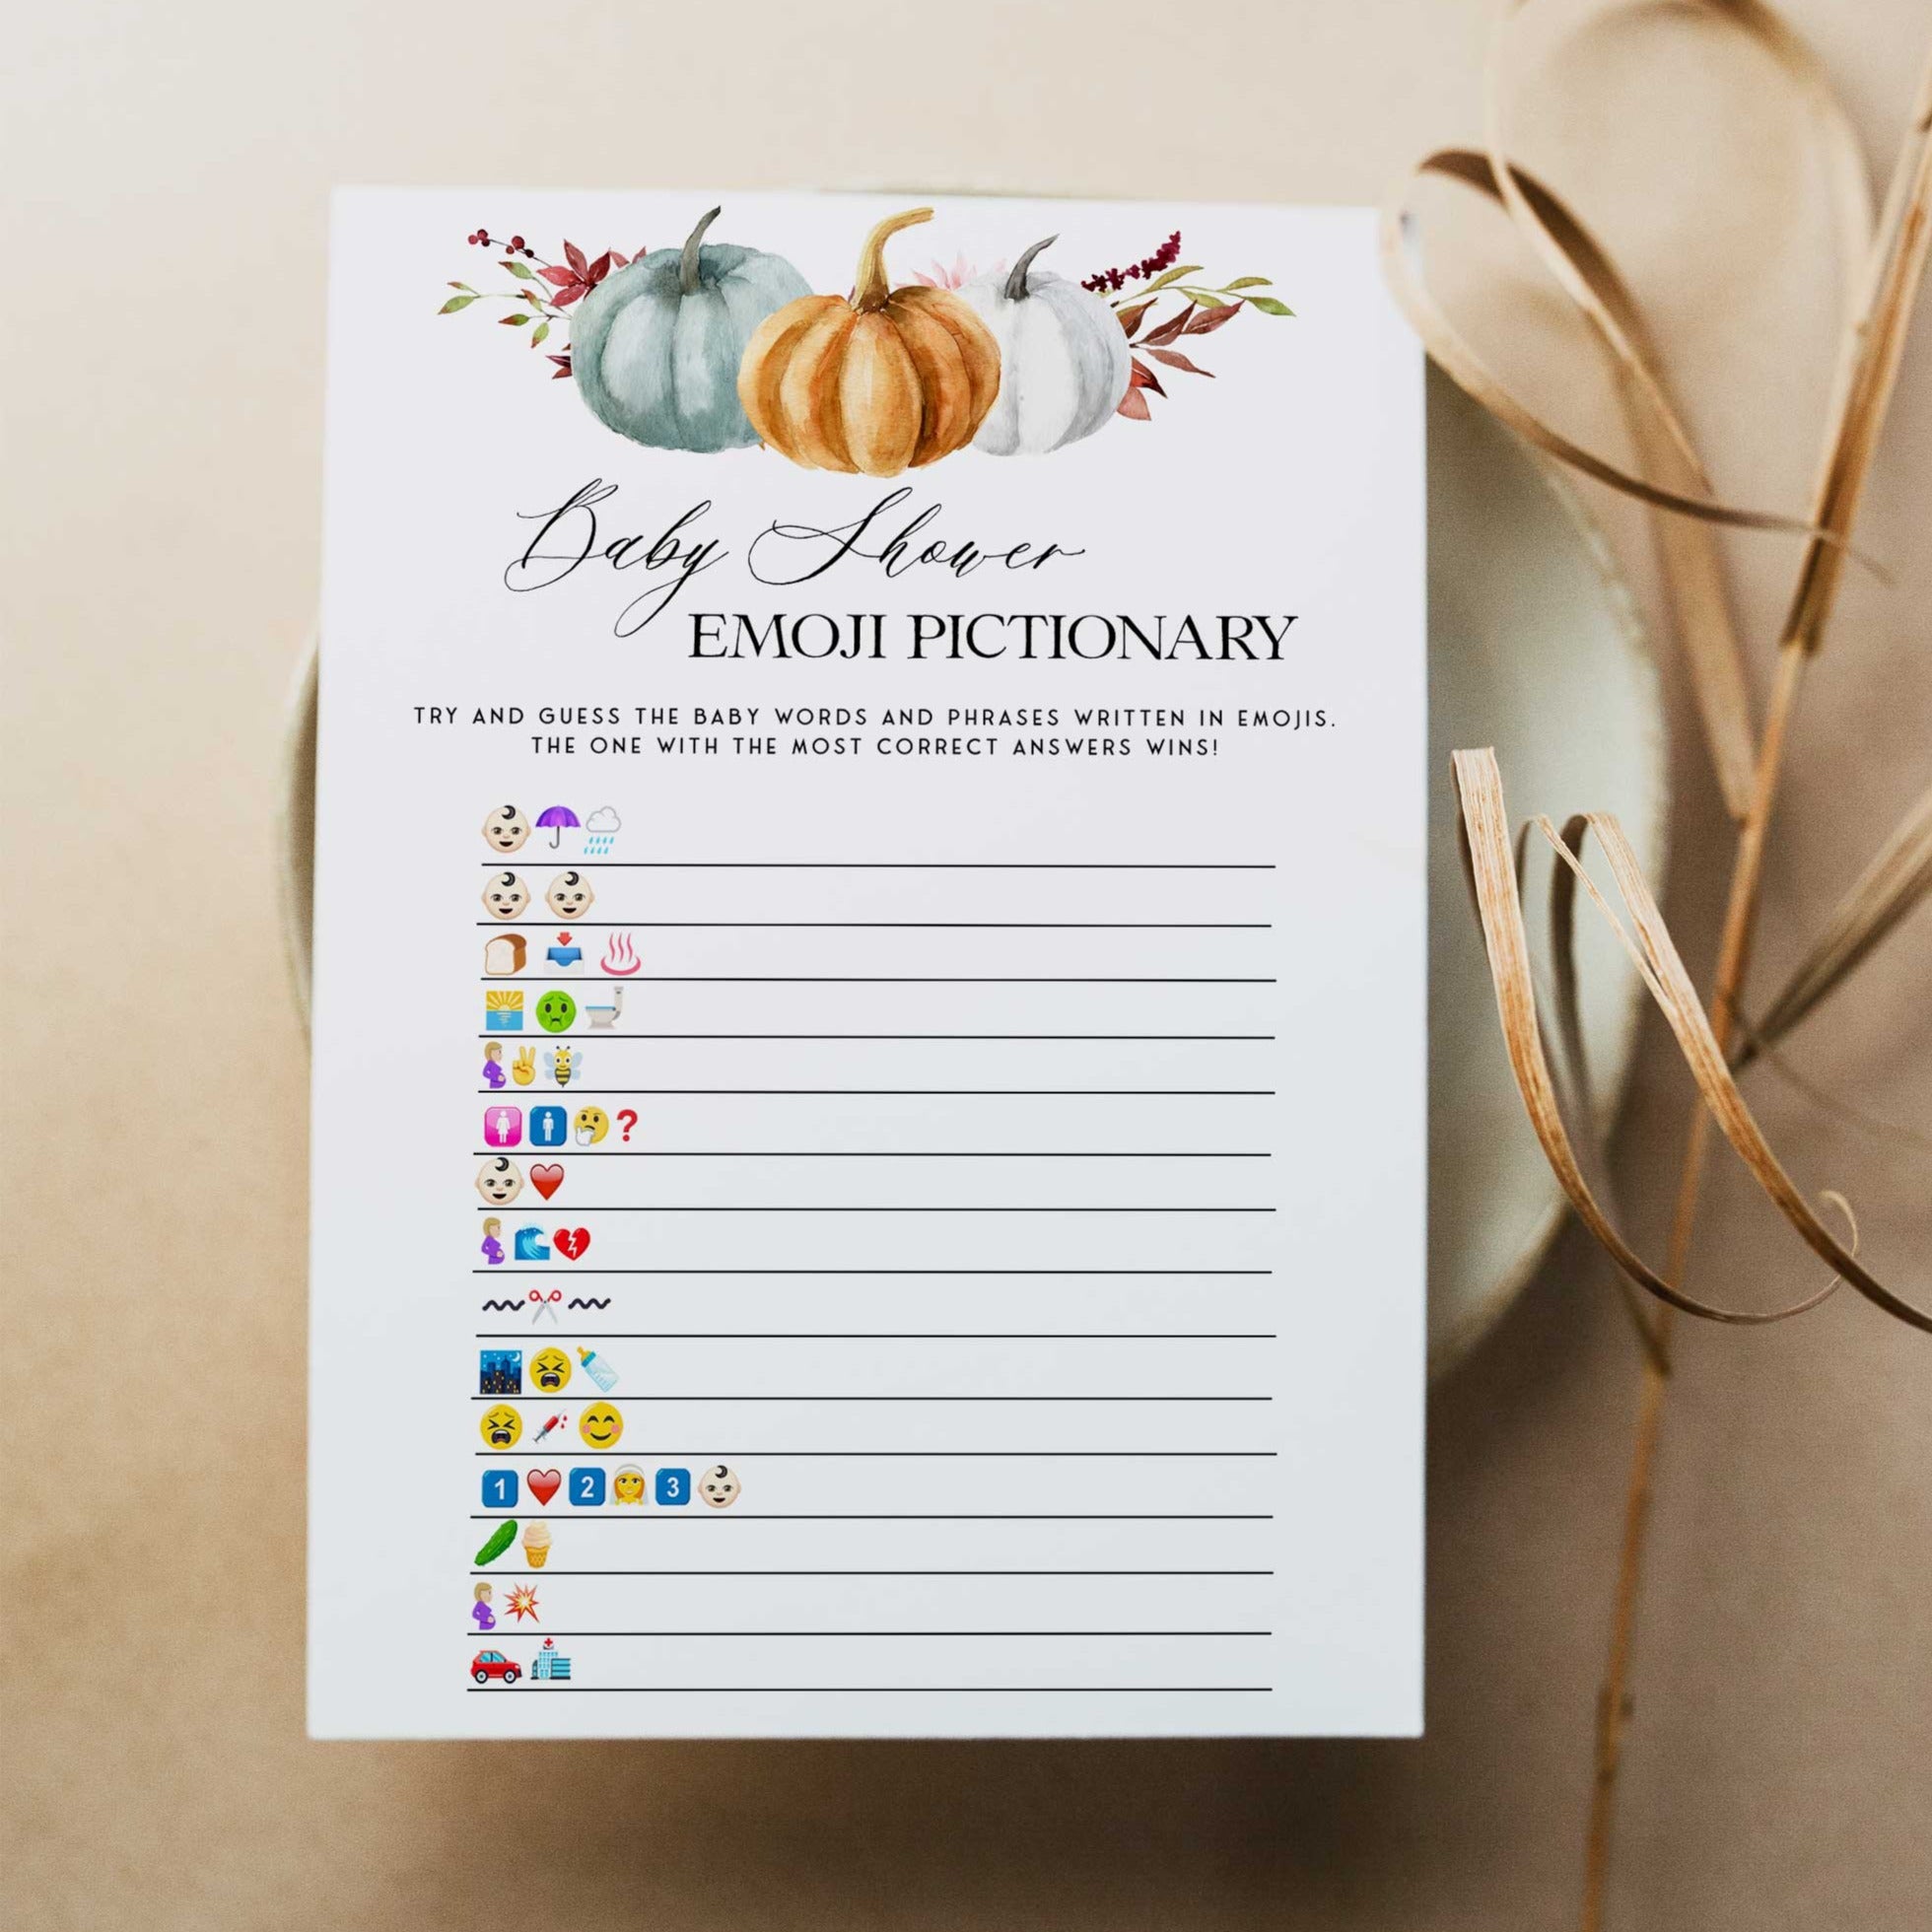 Fully editable and printable baby shower emoji pictionary game with a fall pumpkin design. Perfect for a Fall Pumpkin baby shower themed party